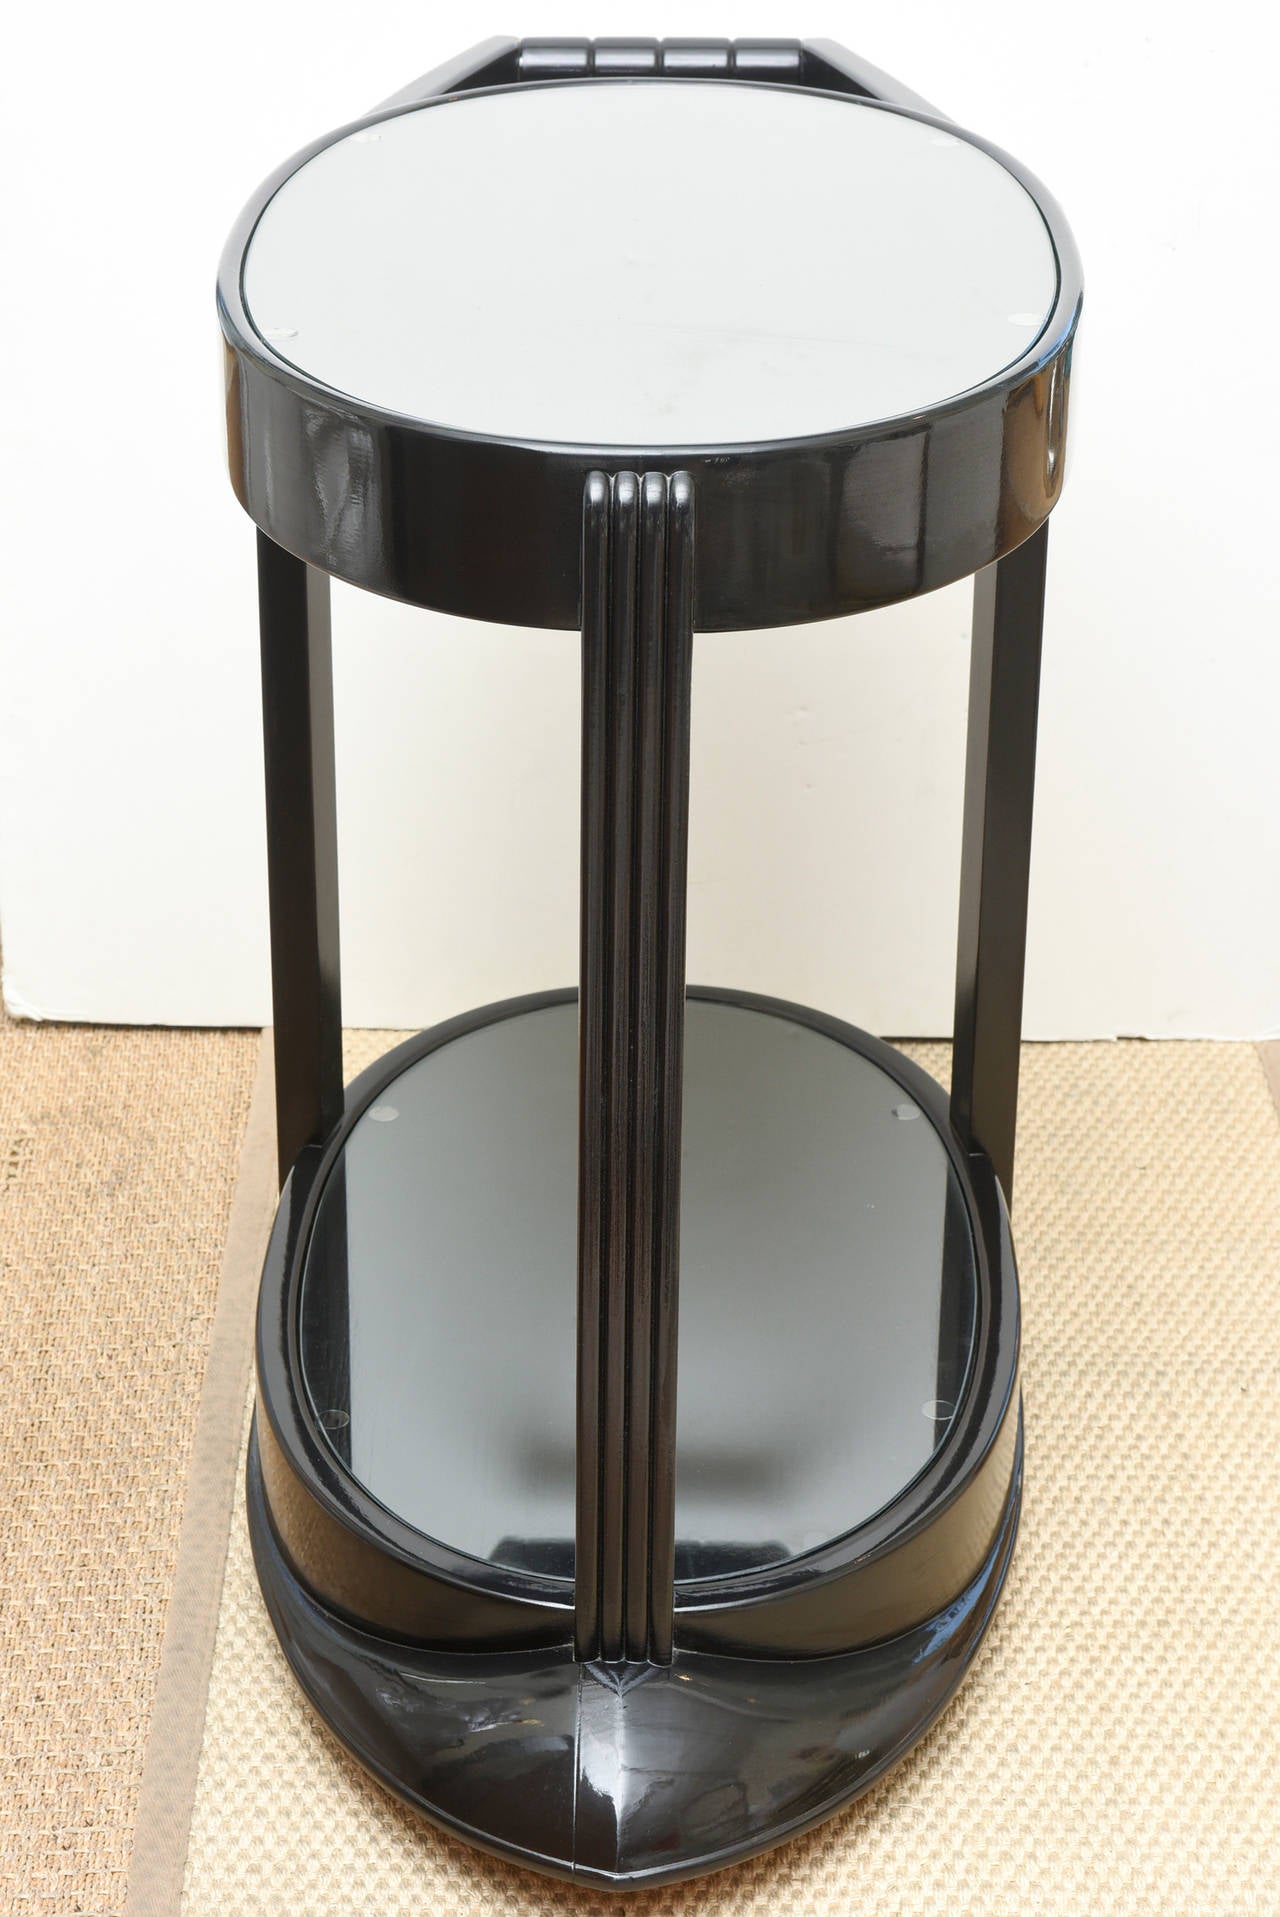 Art Deco Ebonized Wood and Glass Moderne Bar Cart or Trolley Vintage In Good Condition For Sale In North Miami, FL